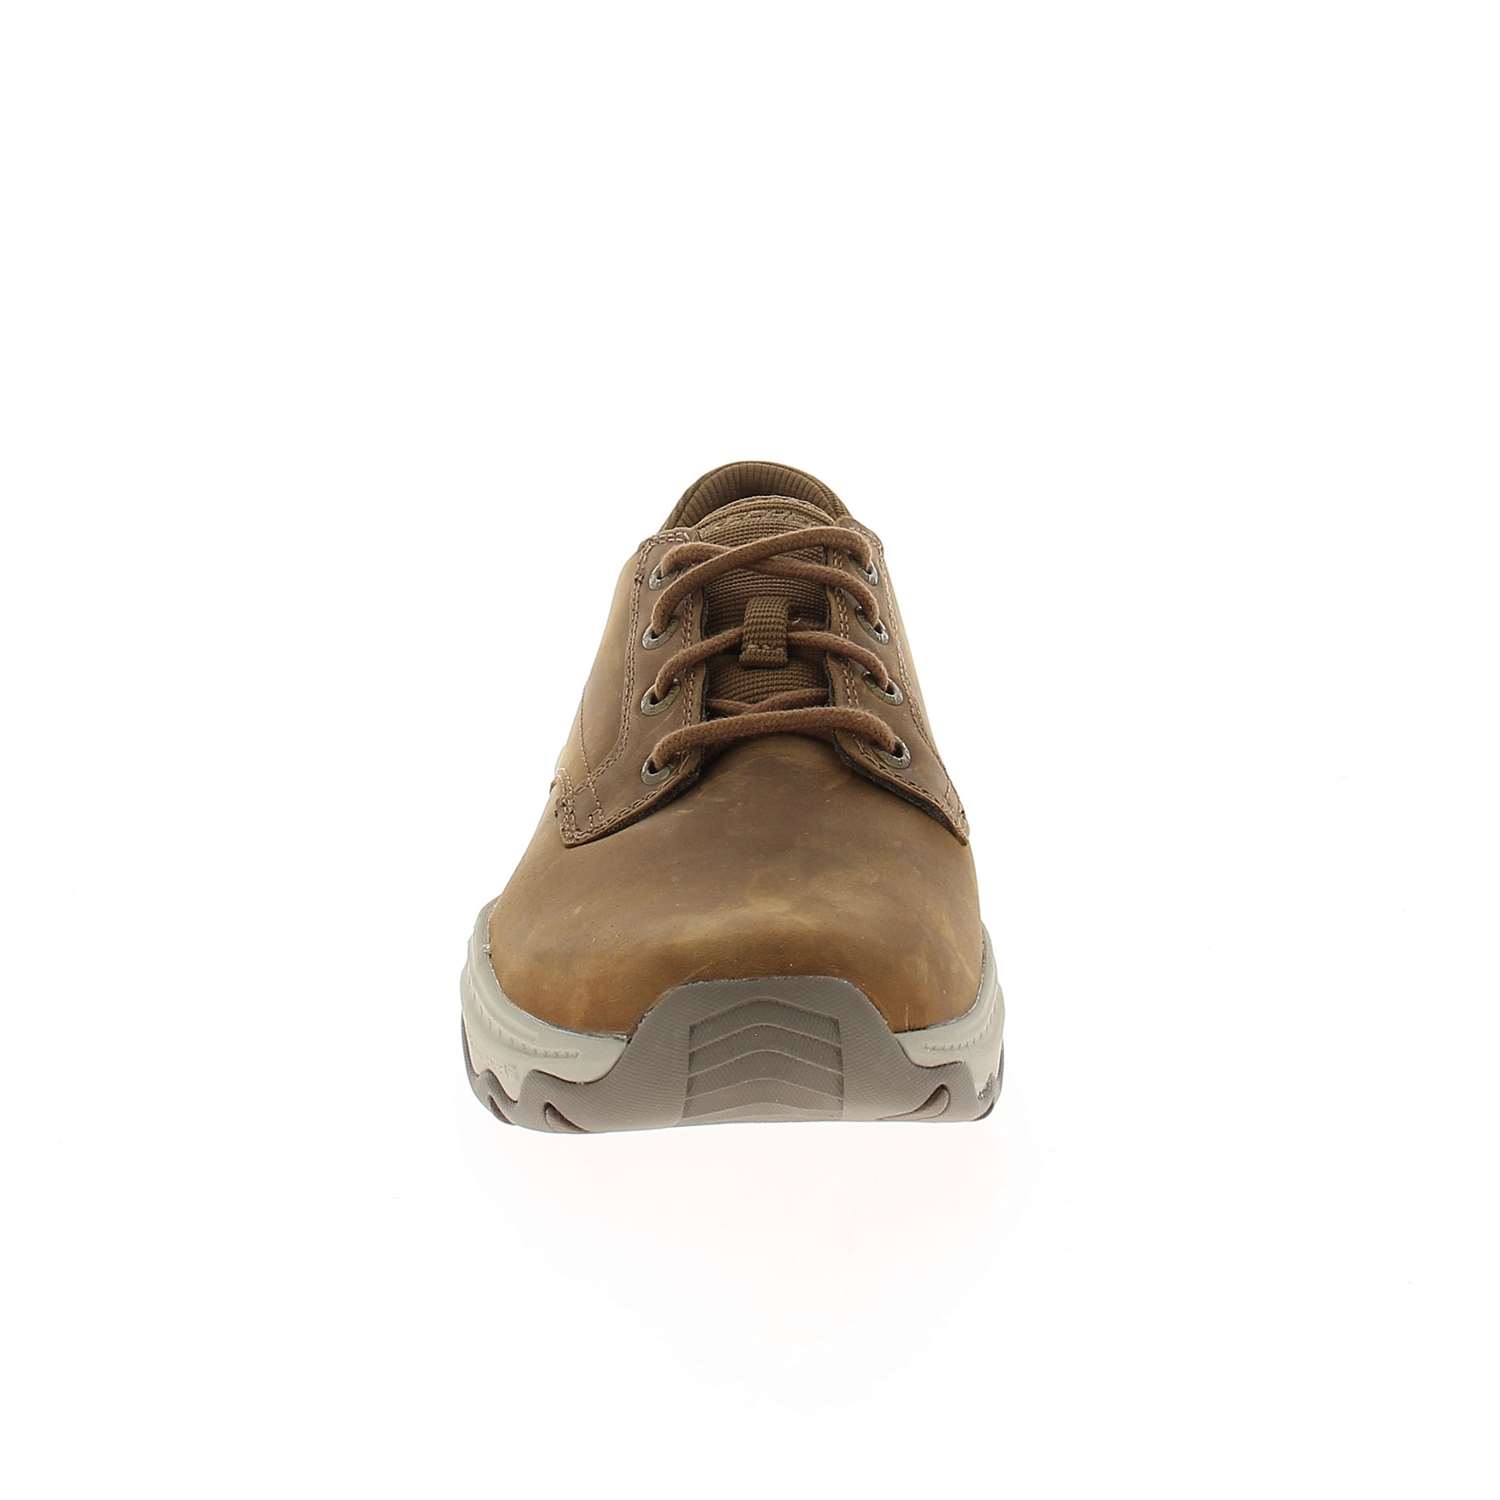 03 - CRASTER RELAXED FIT - SKECHERS - Chaussures à lacets - Nubuck